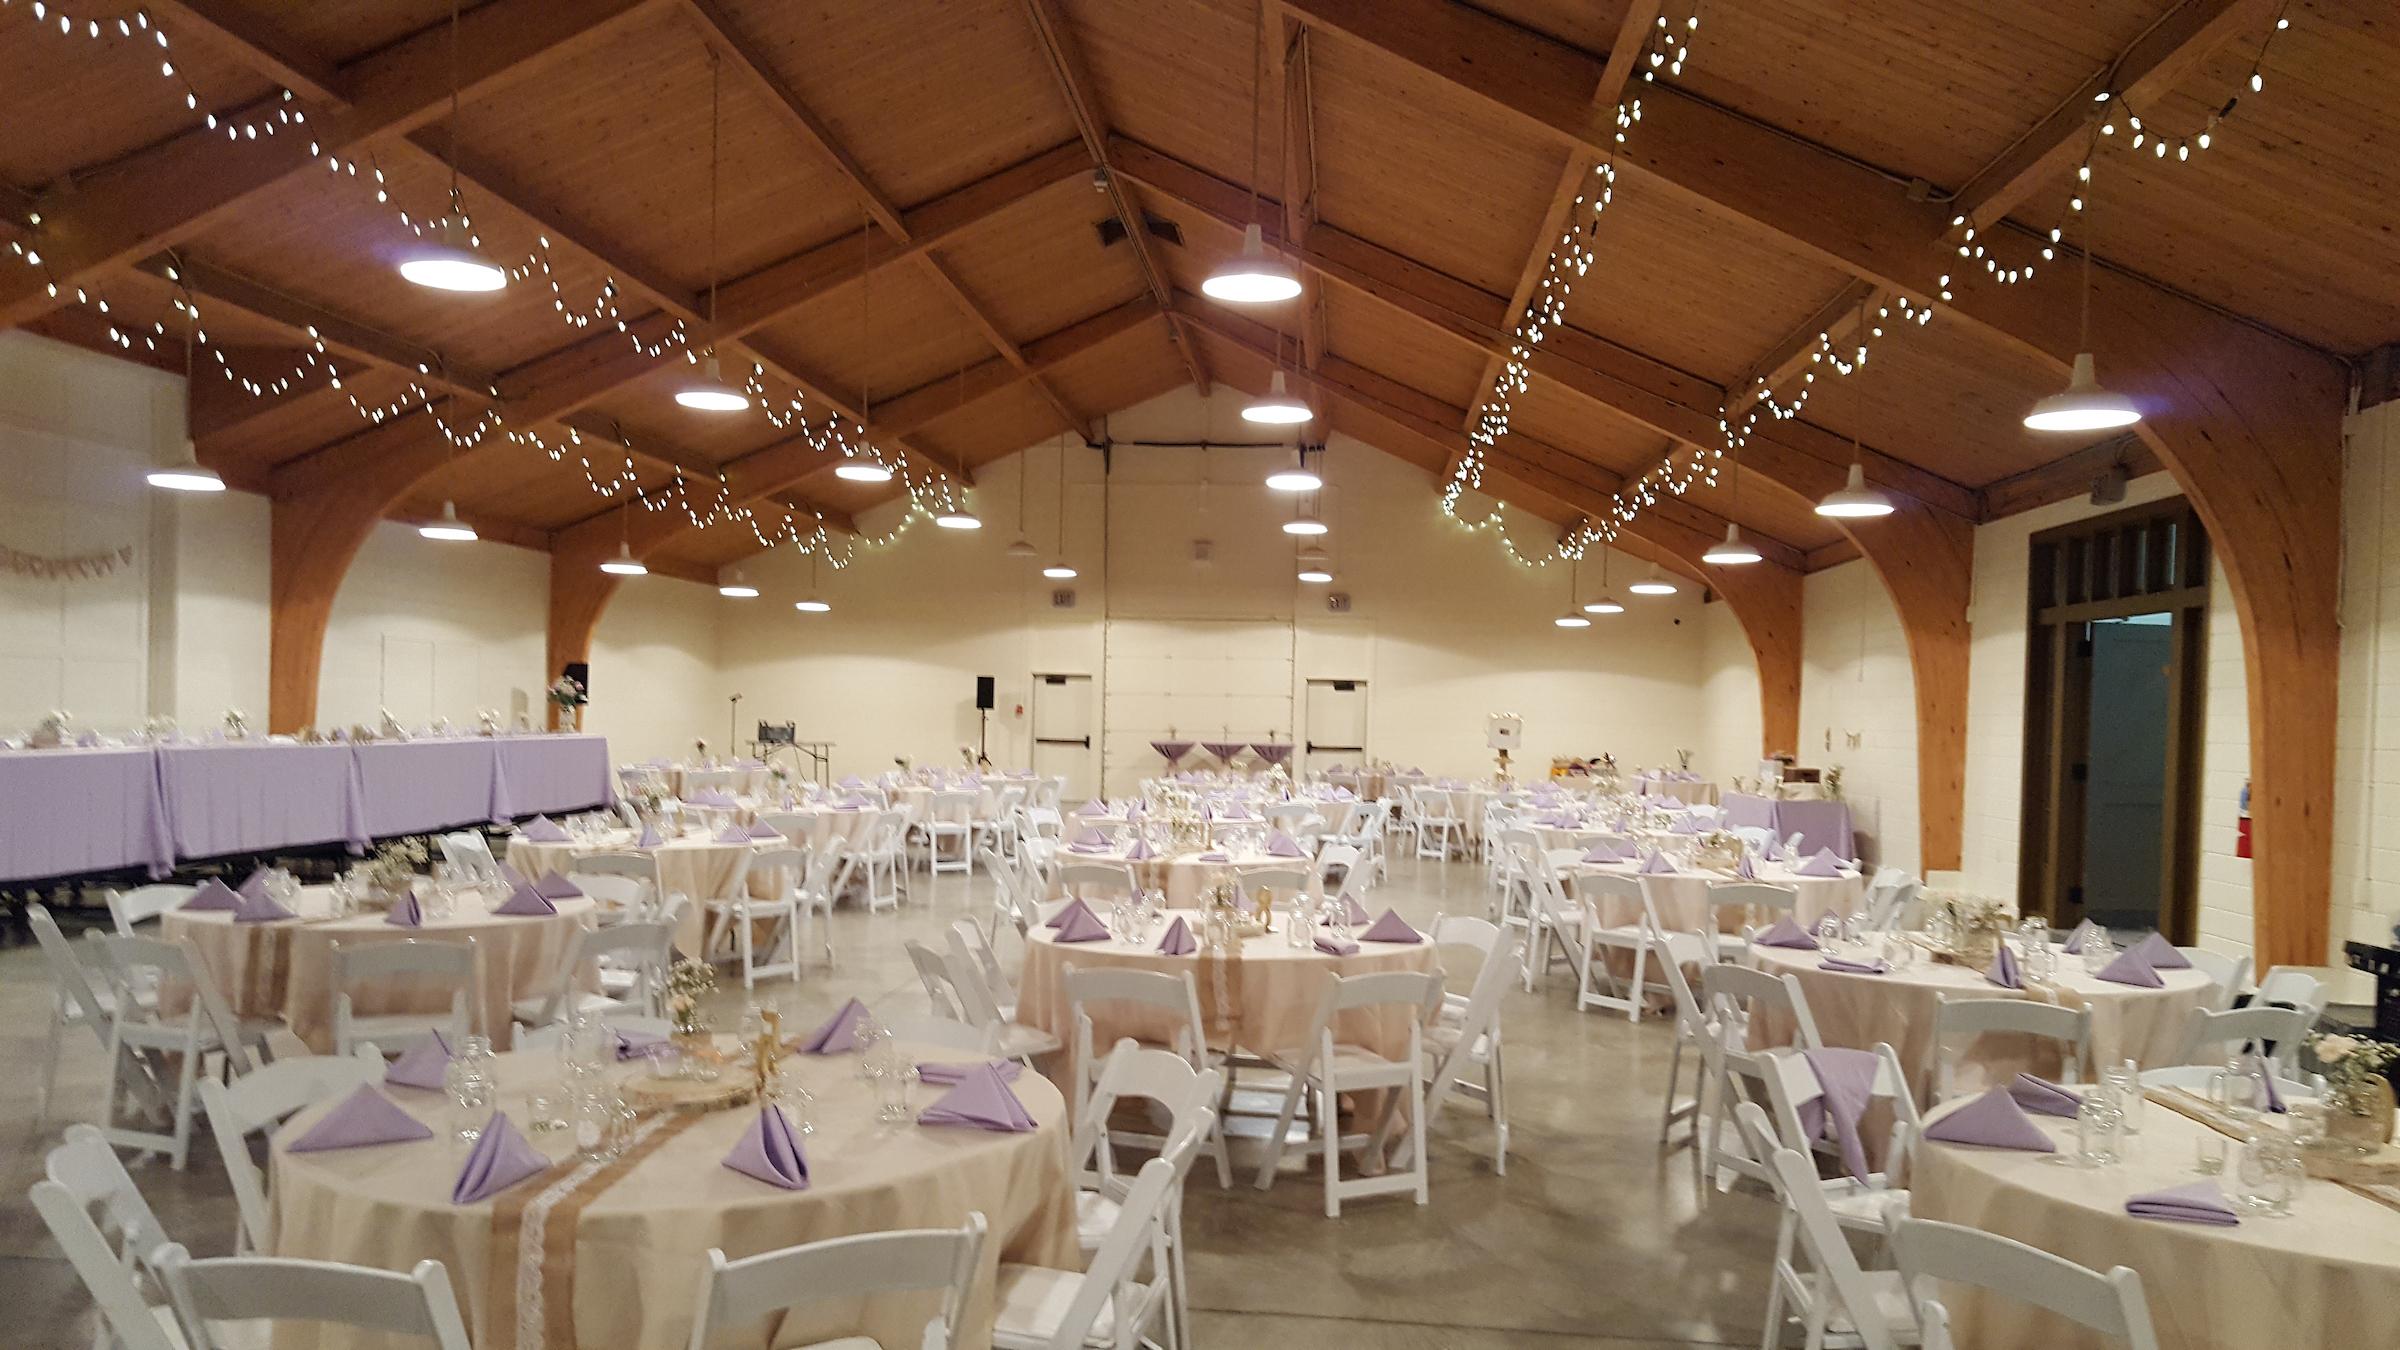 The pavilion set up in white and lilac for this indoor wedding reception. 